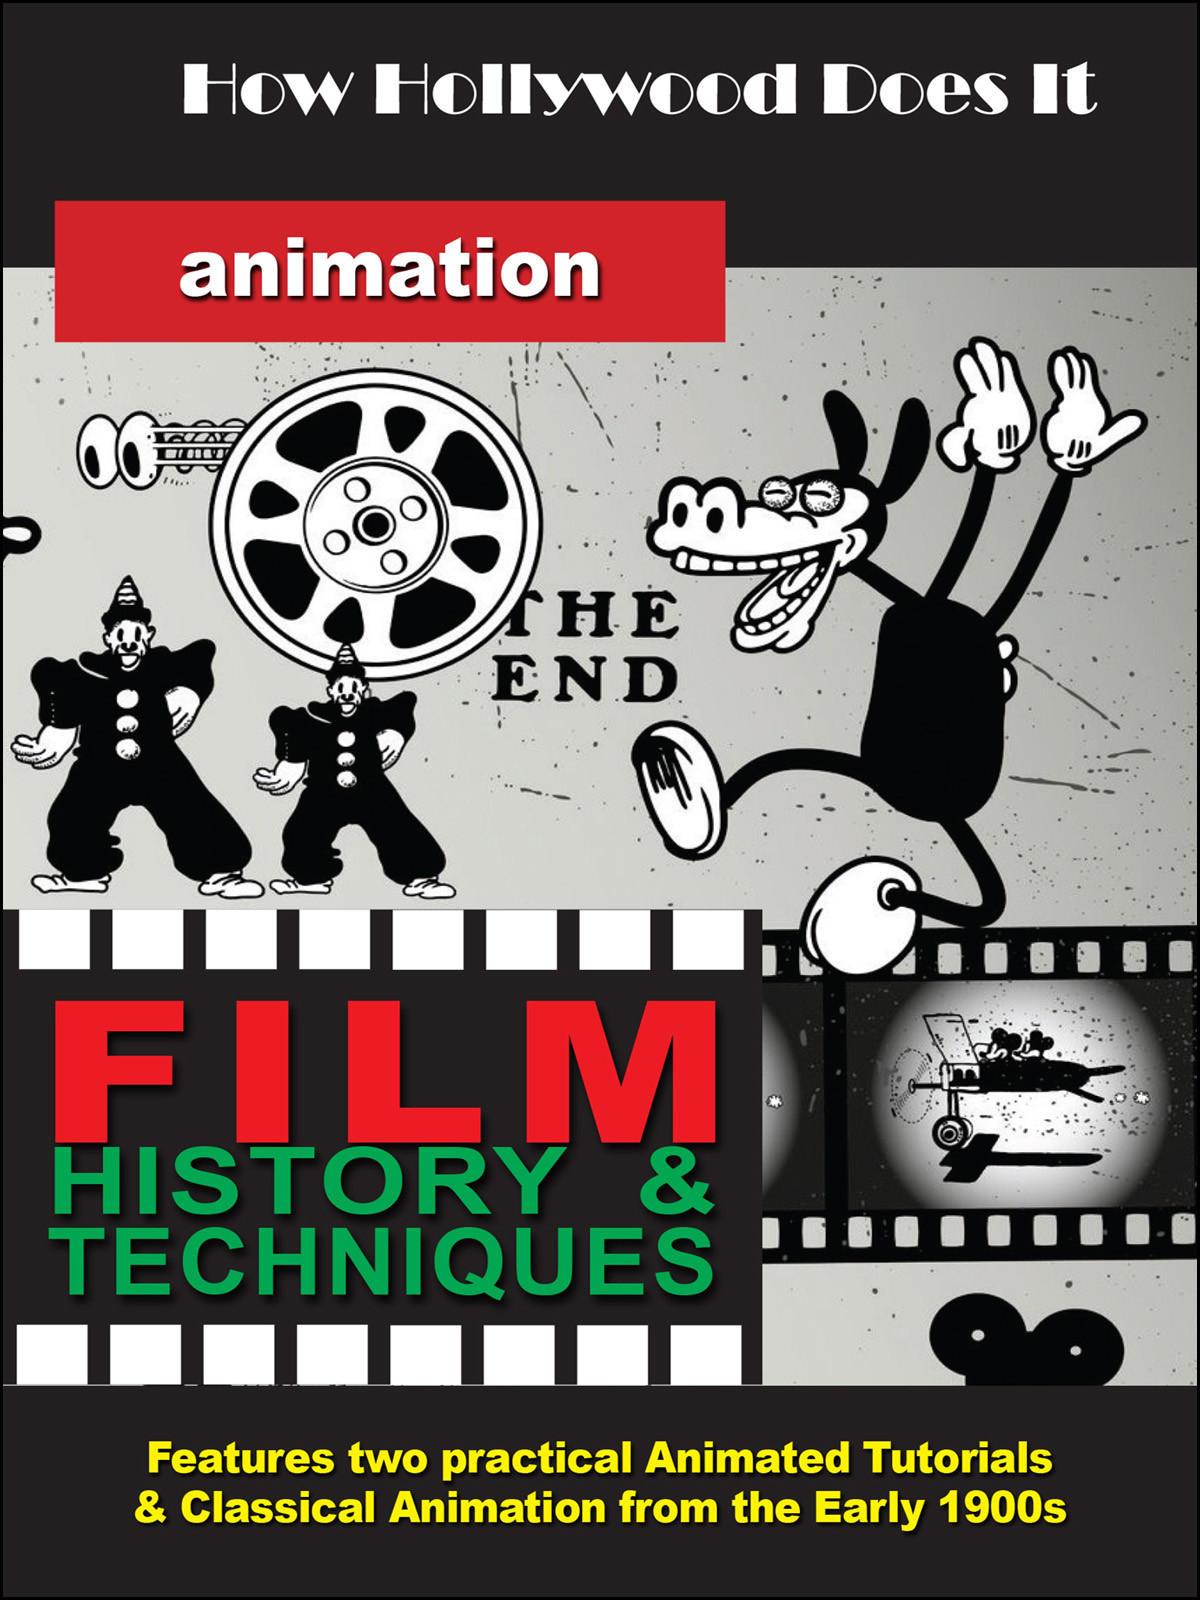 F2721 - How Hollywood Does It - Film History & Techniques of Animation